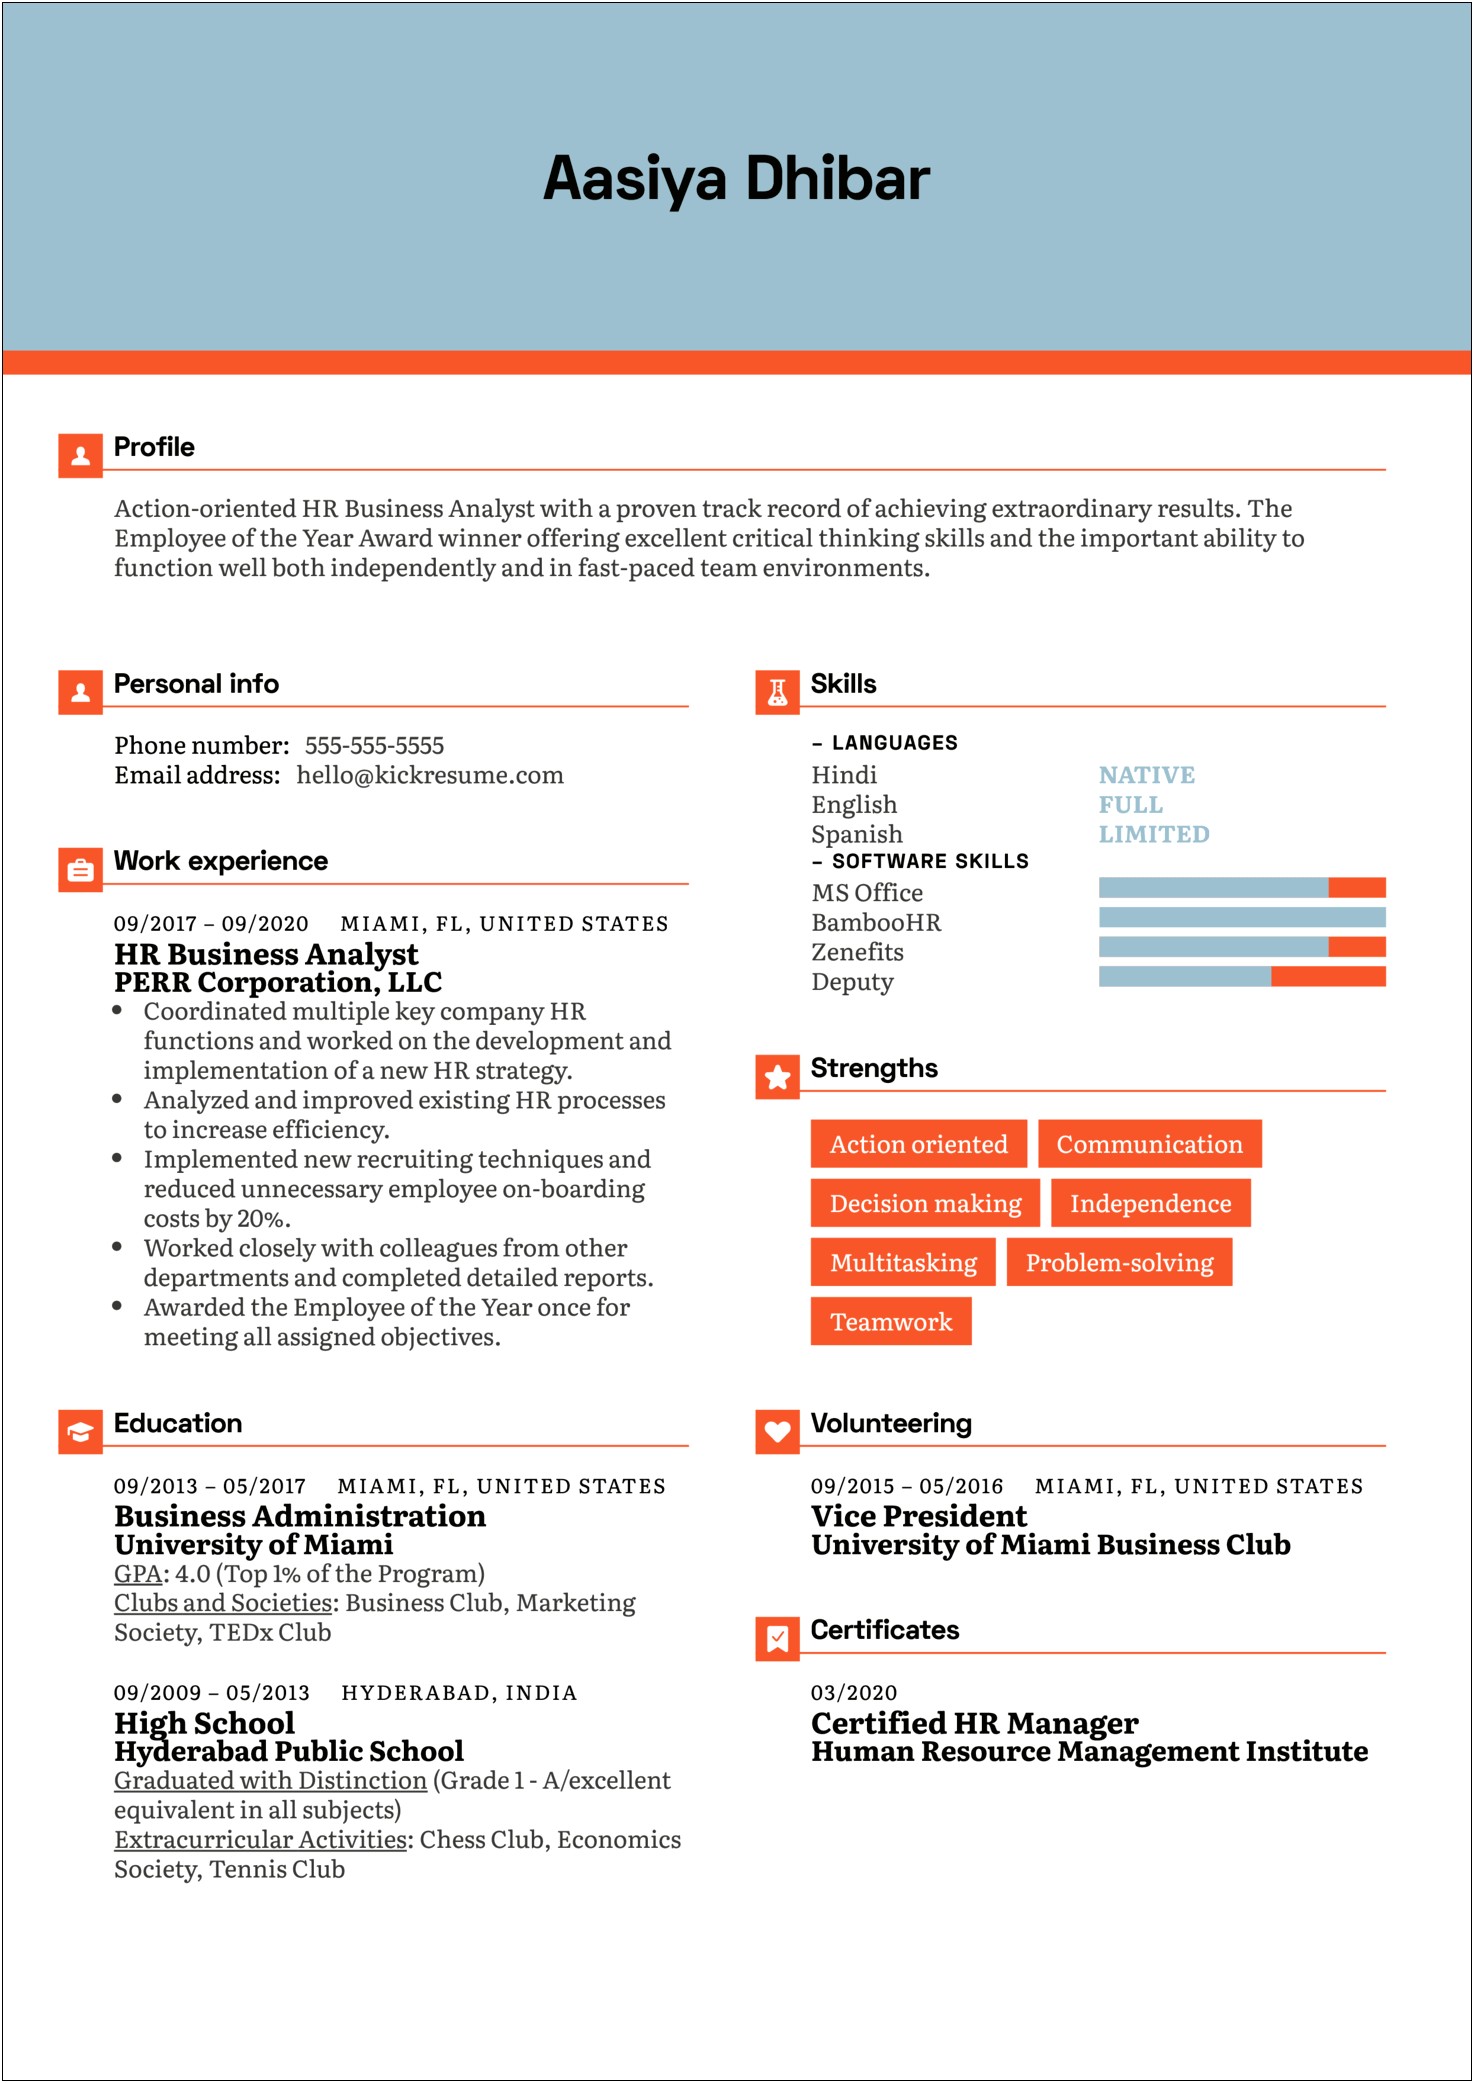 Examples Of Business Analyst Resume